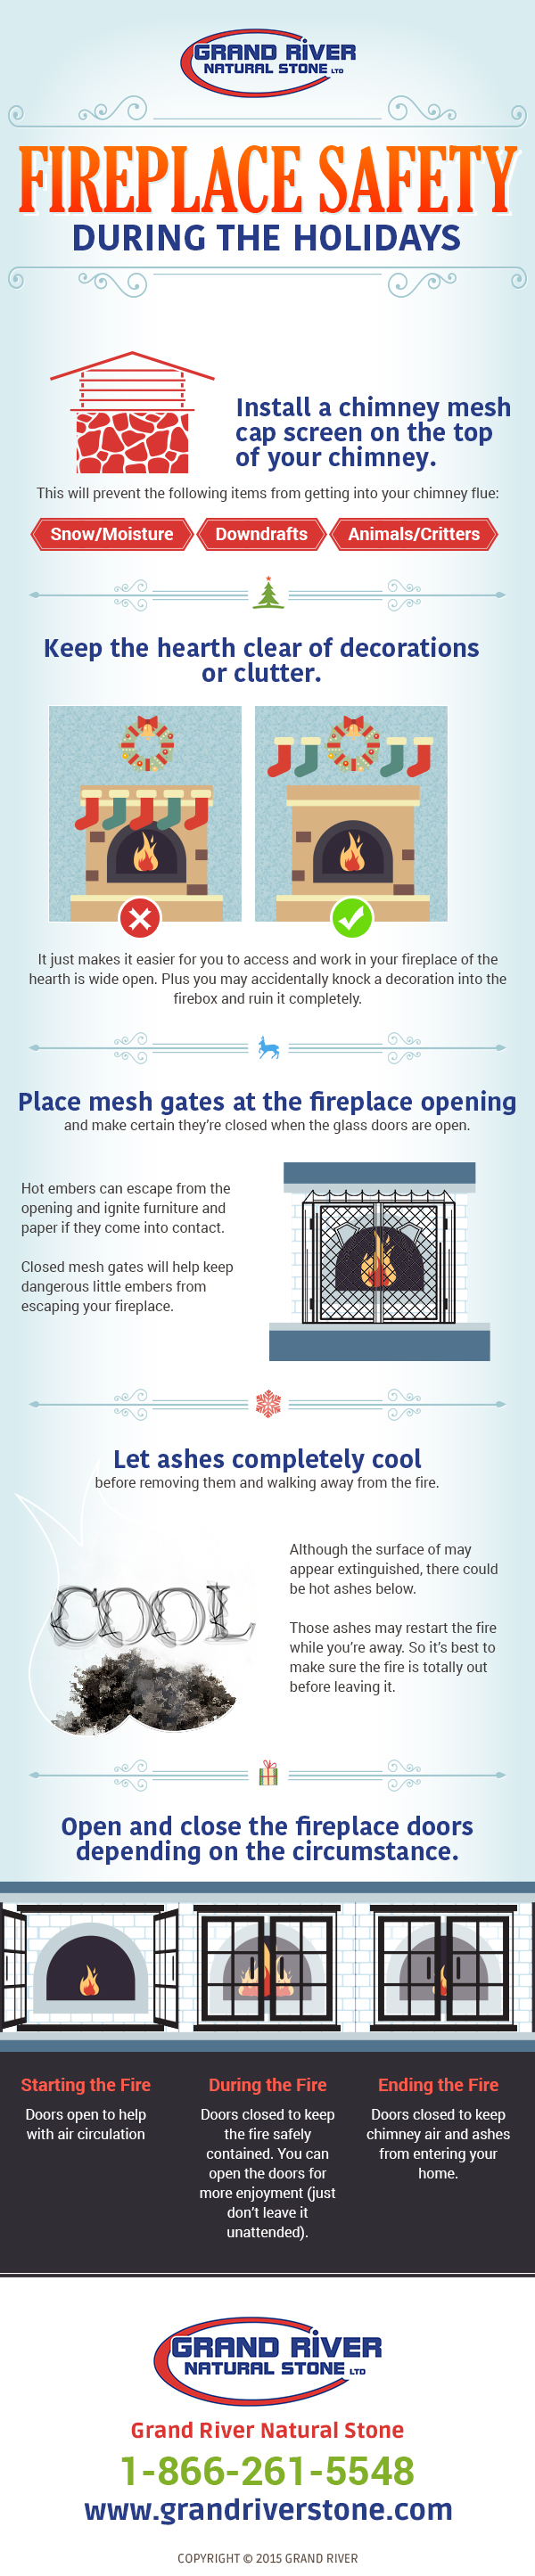 Fireplace Safety During the Holidays